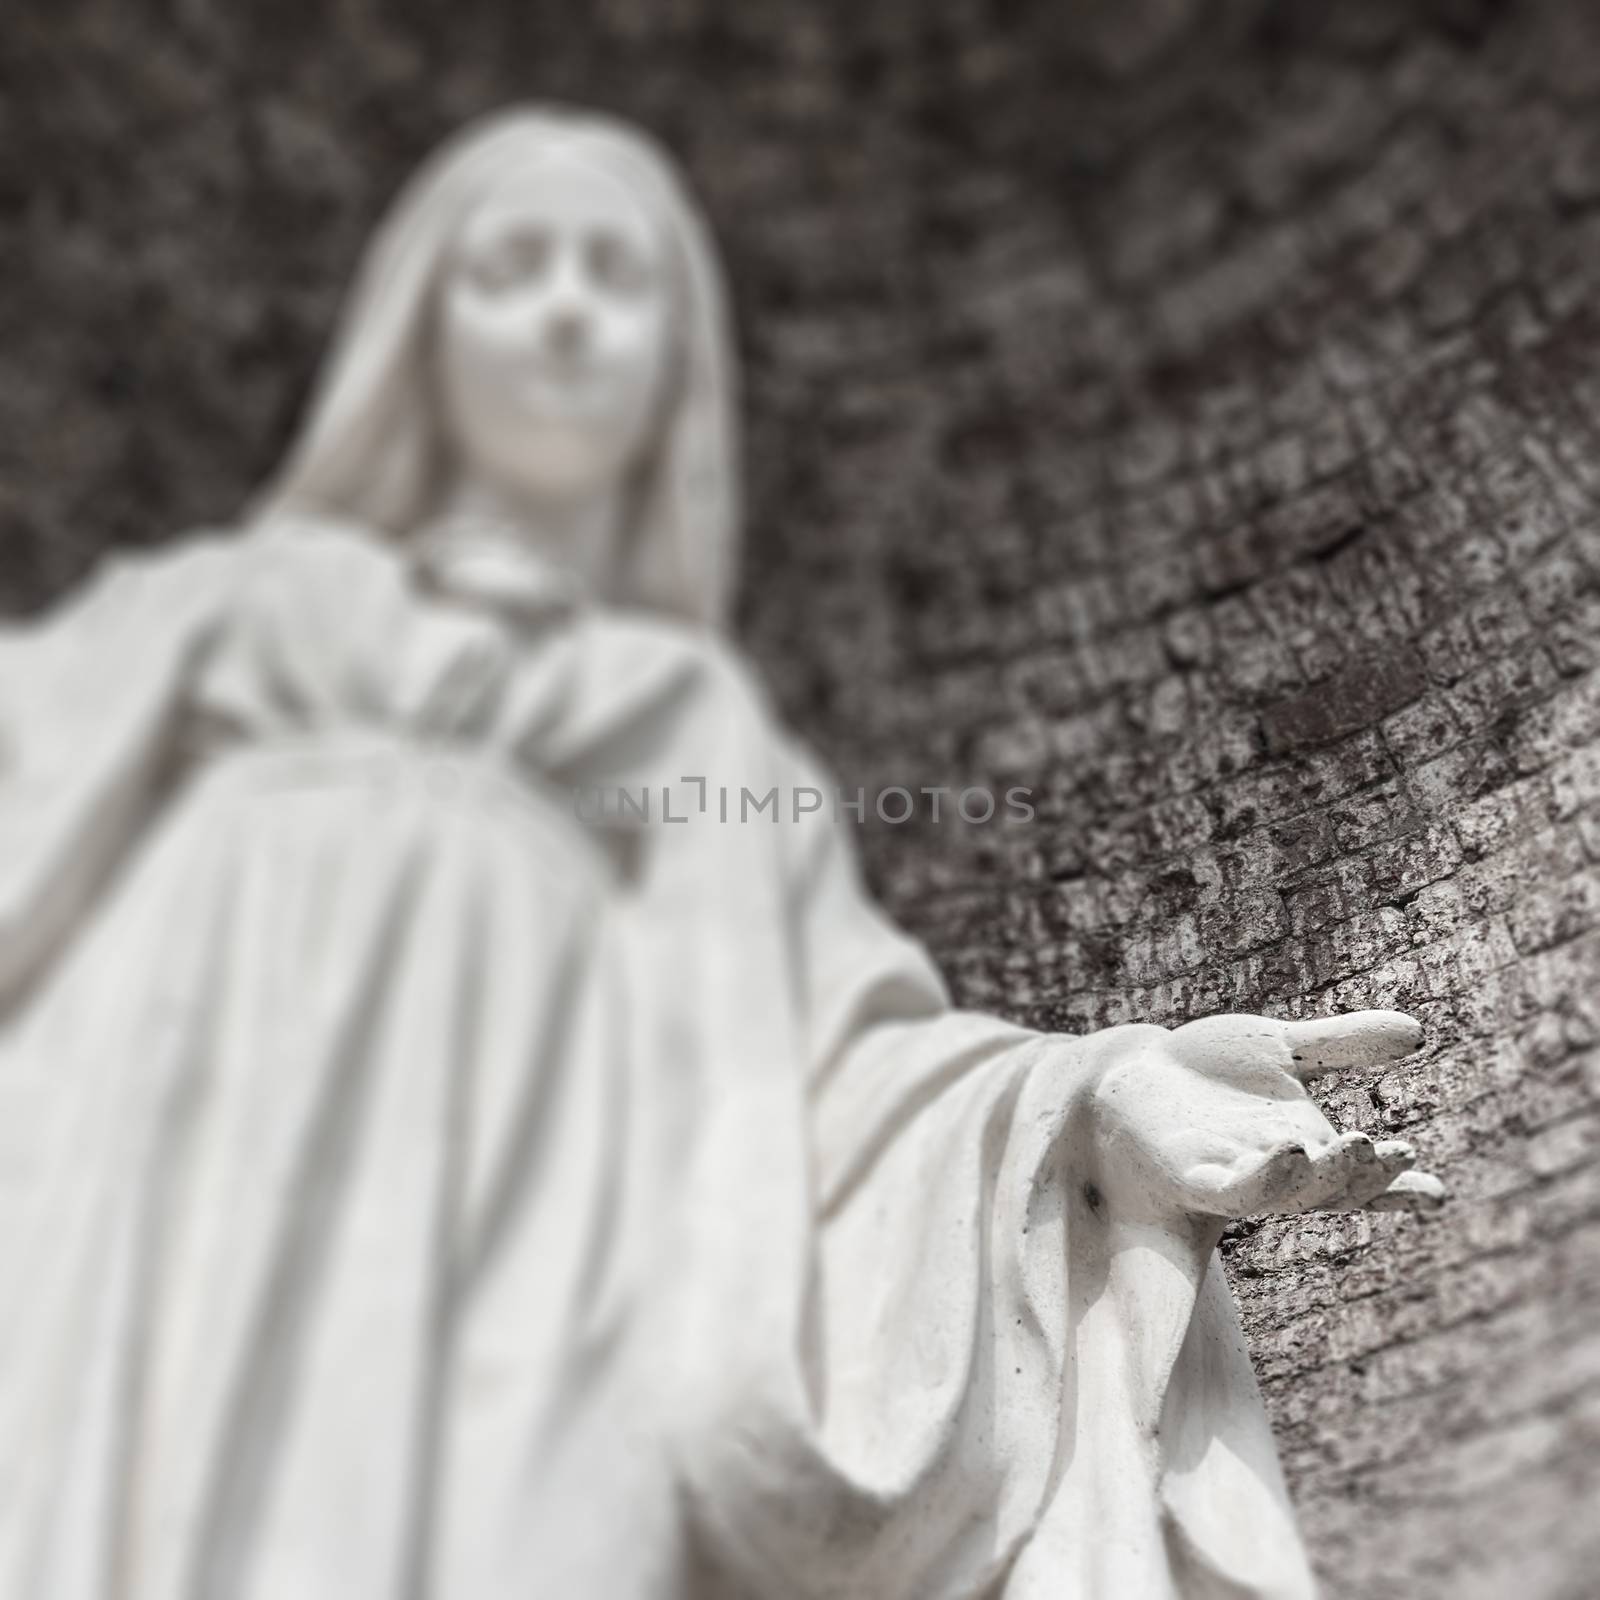 Blurred image Virgin mary statue background. Selected focus on her hand.